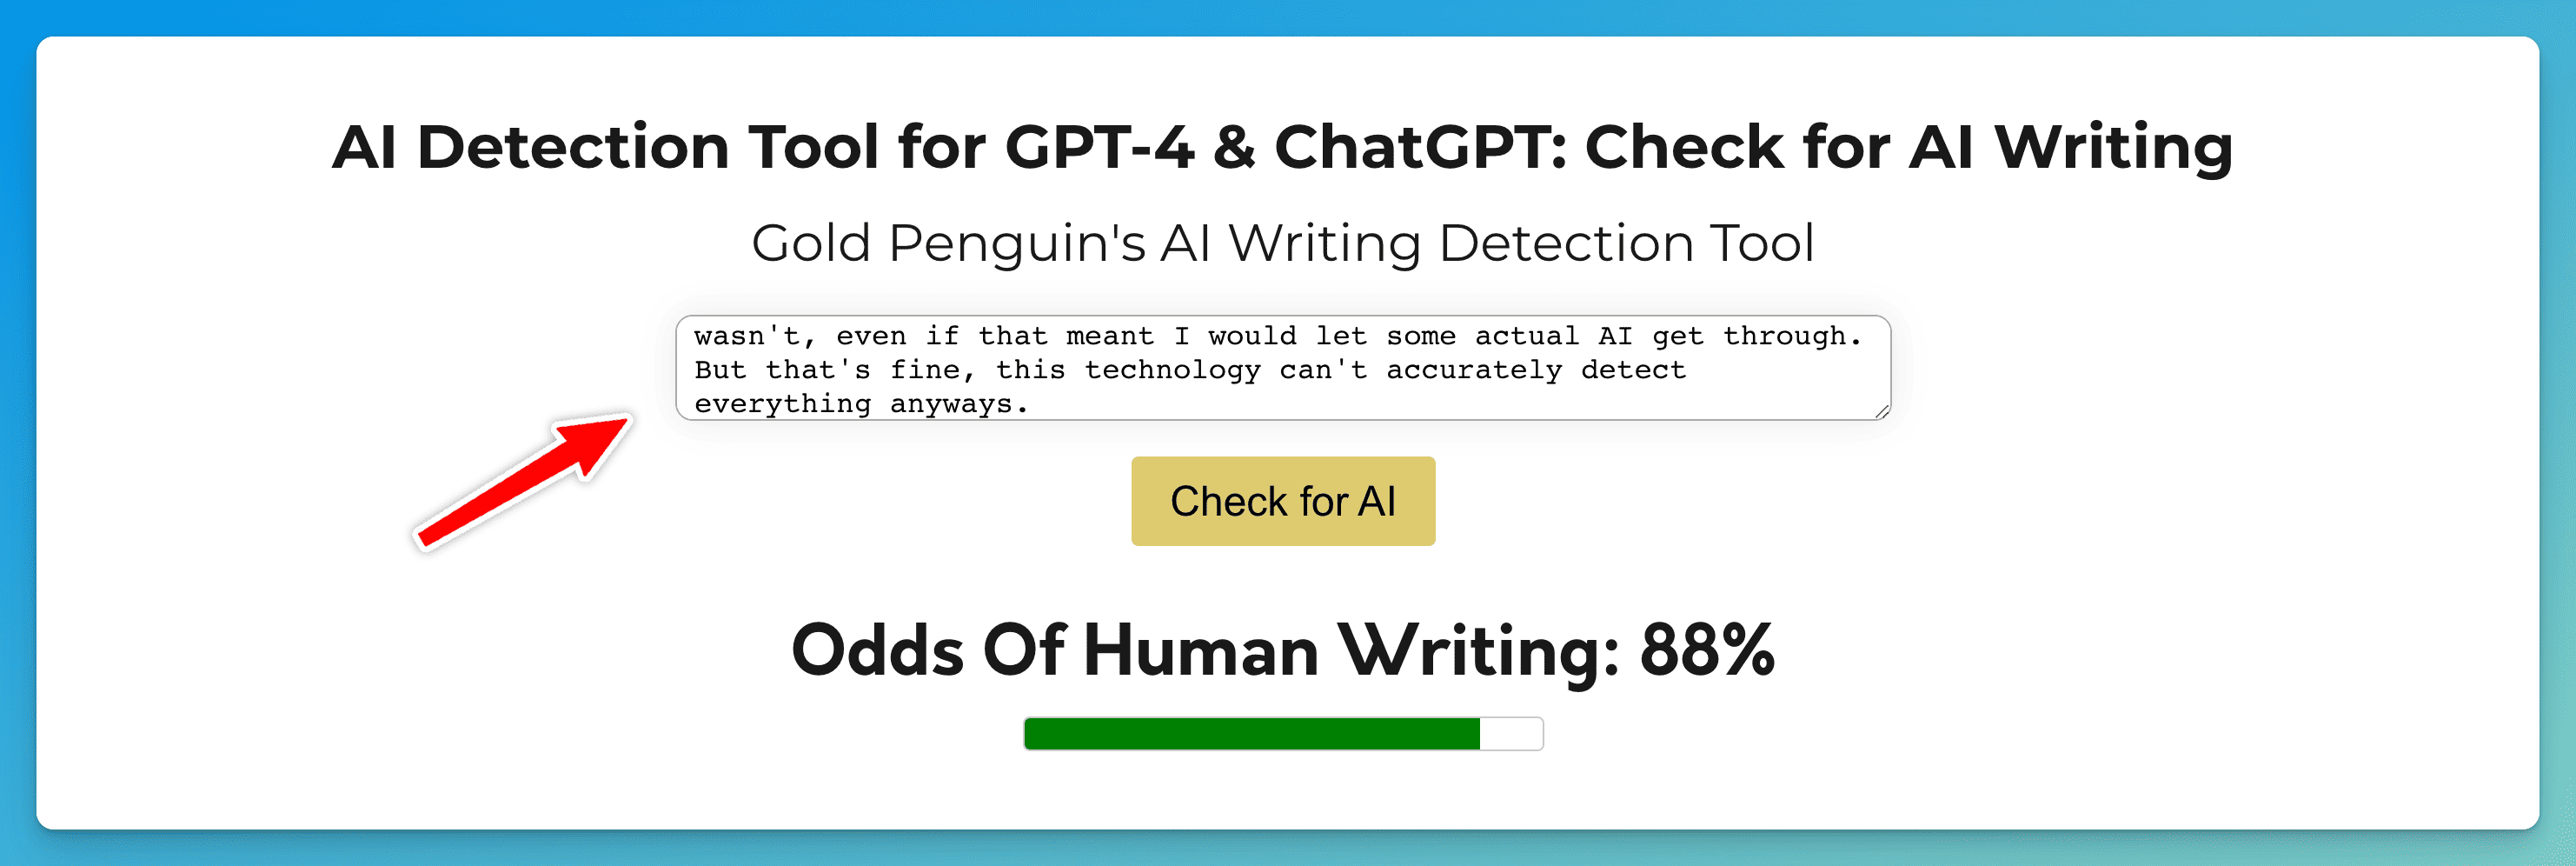 Gold Penguin's very own AI writing detection tool that won't overdetect content as being written with AI when it's not